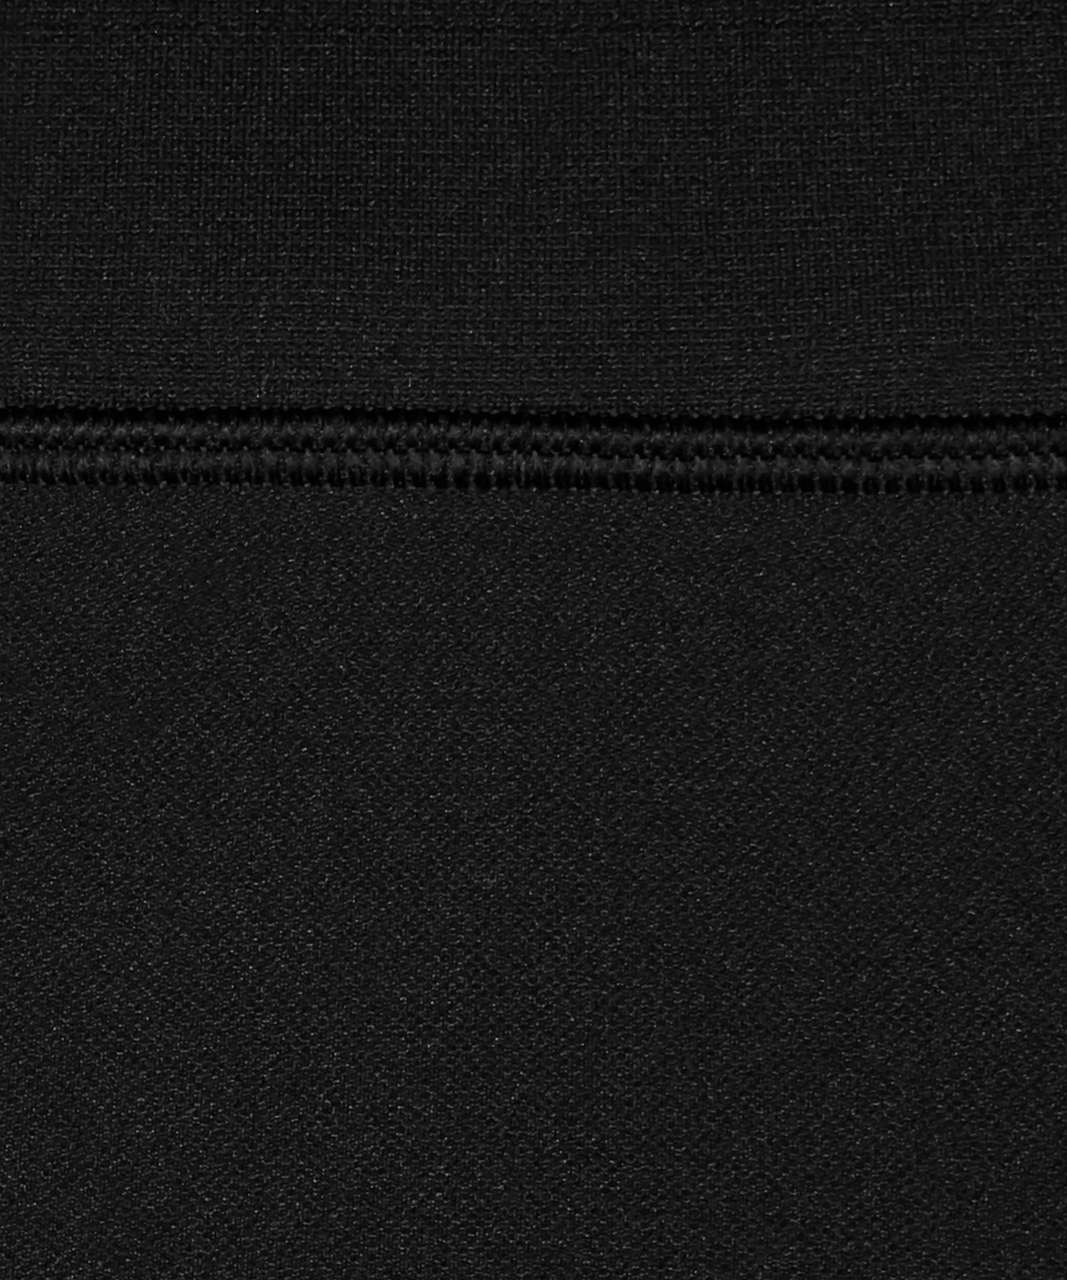 Lululemon For the Chill of It Tight *25" - Black